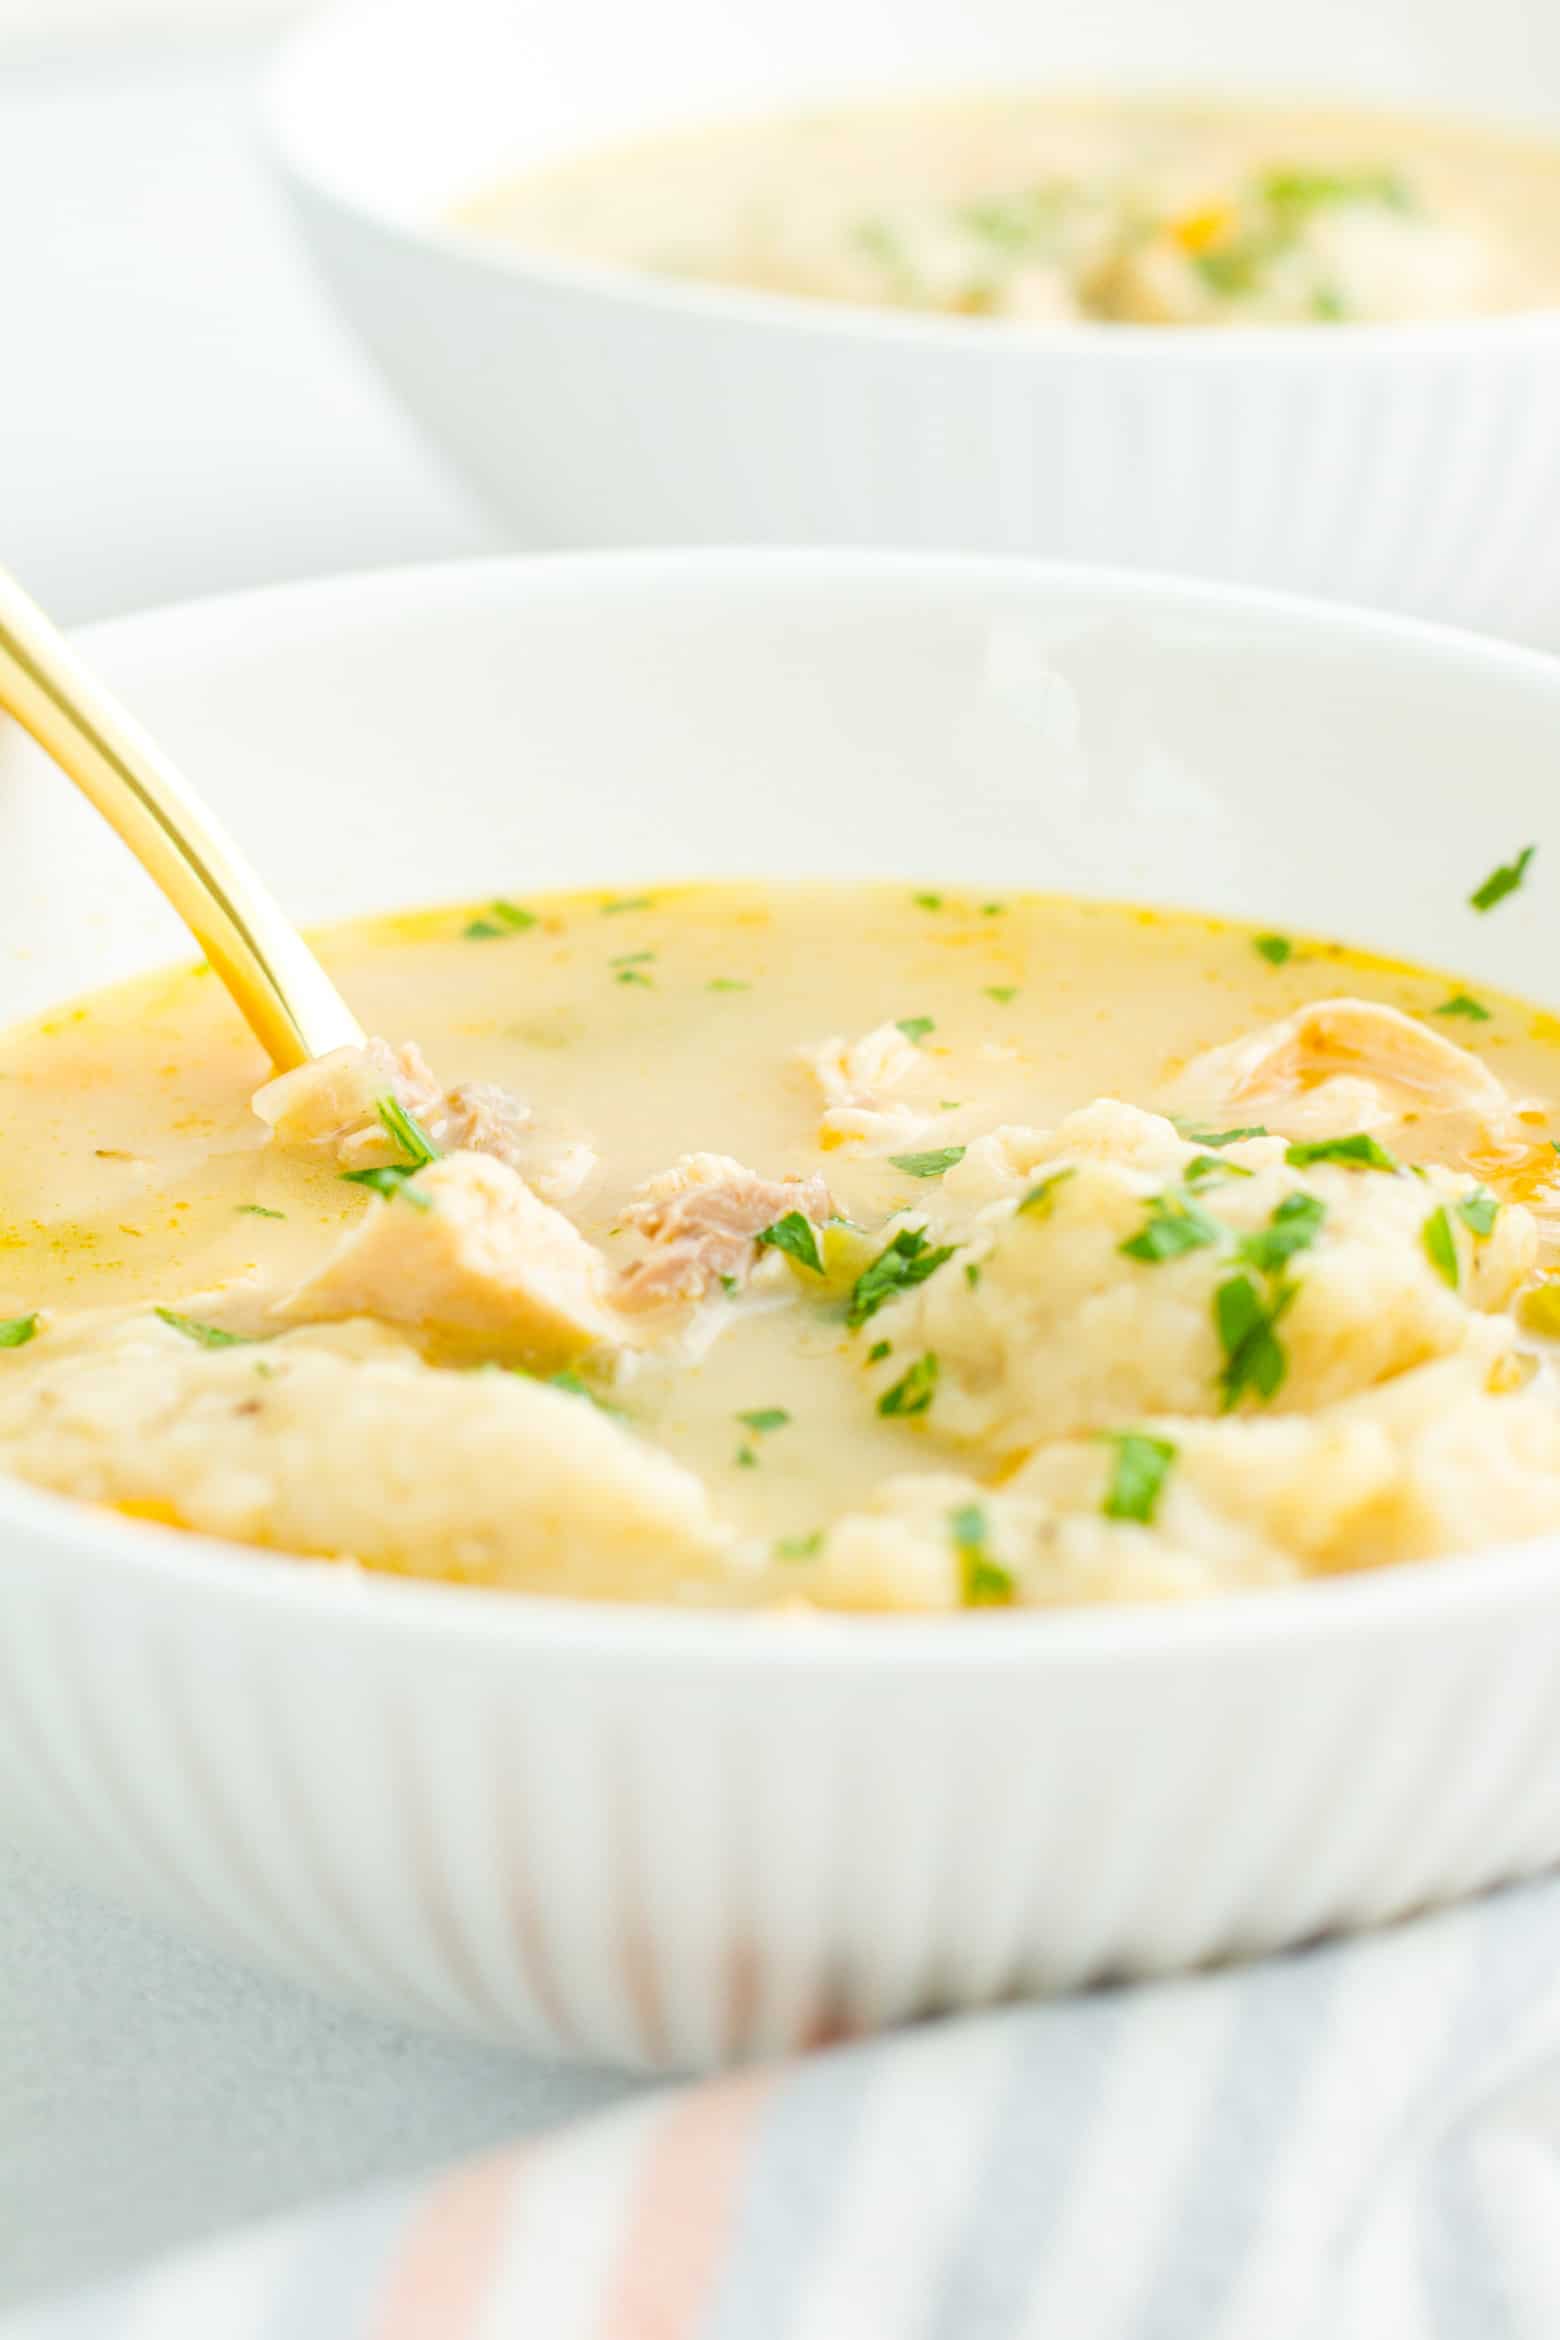 Southern Chicken and Dumplings in a bowl with a spoon.